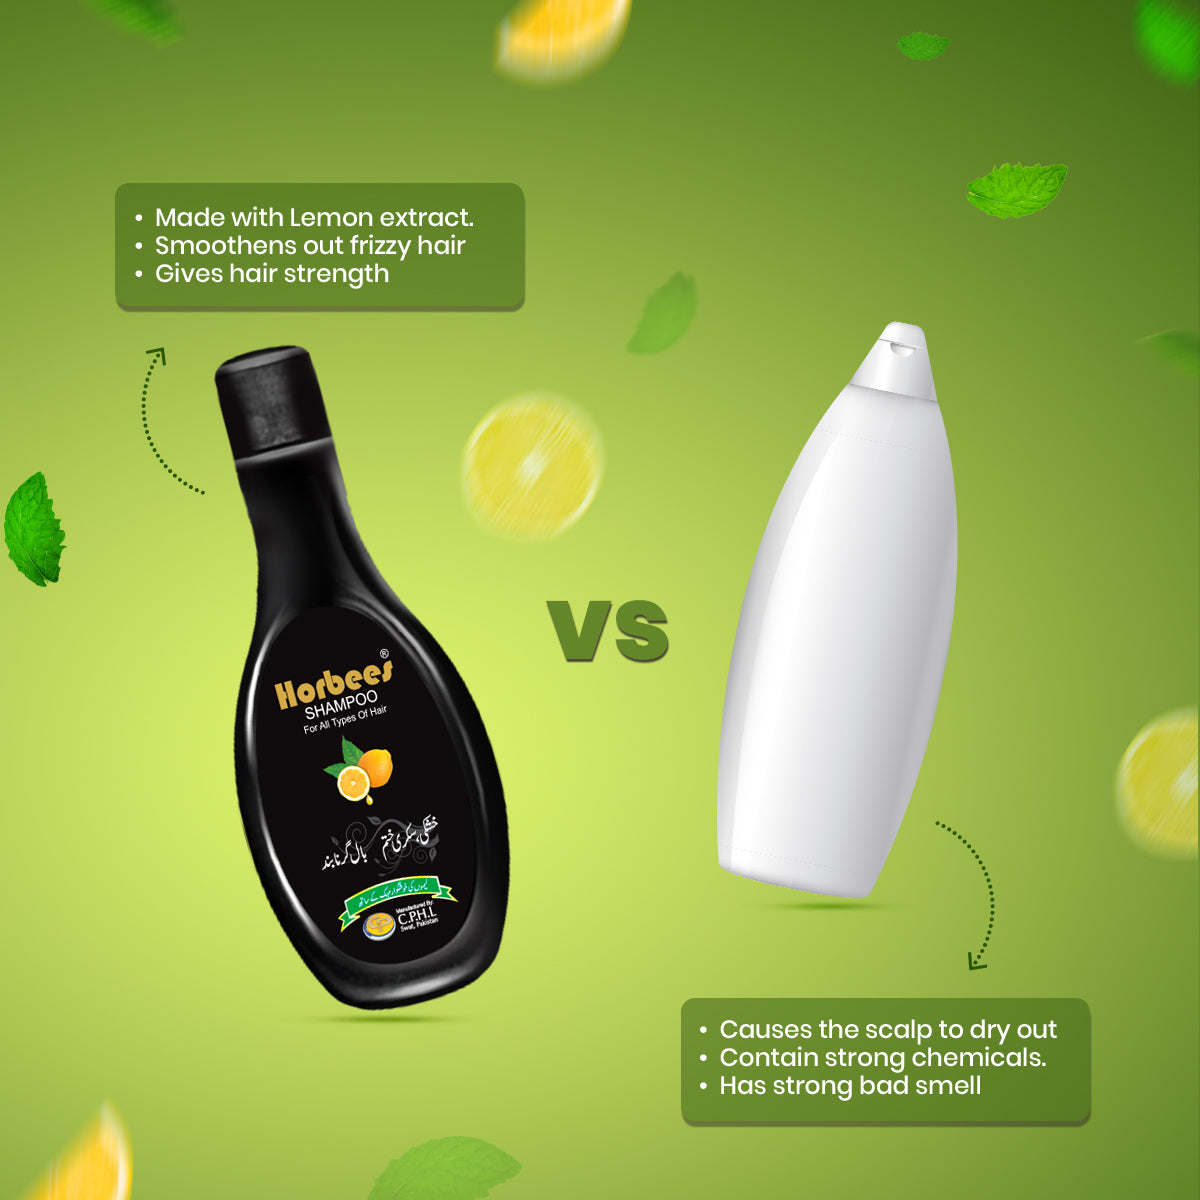 Horbees Shampoo with Lemon Extracts